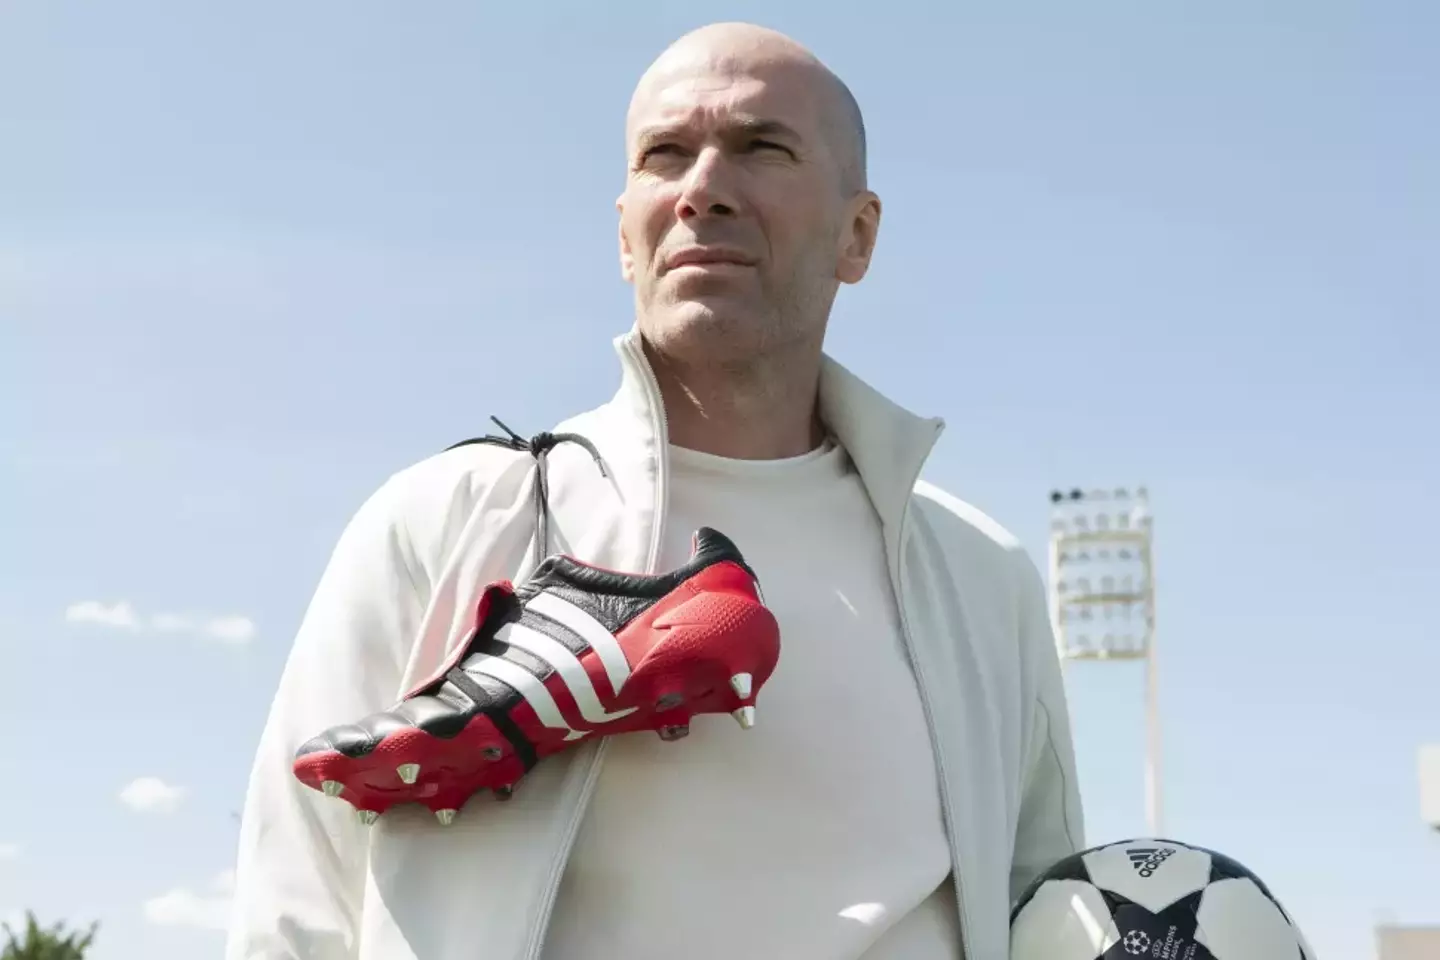 Zidane with the boots he made famous. Image: PA Images